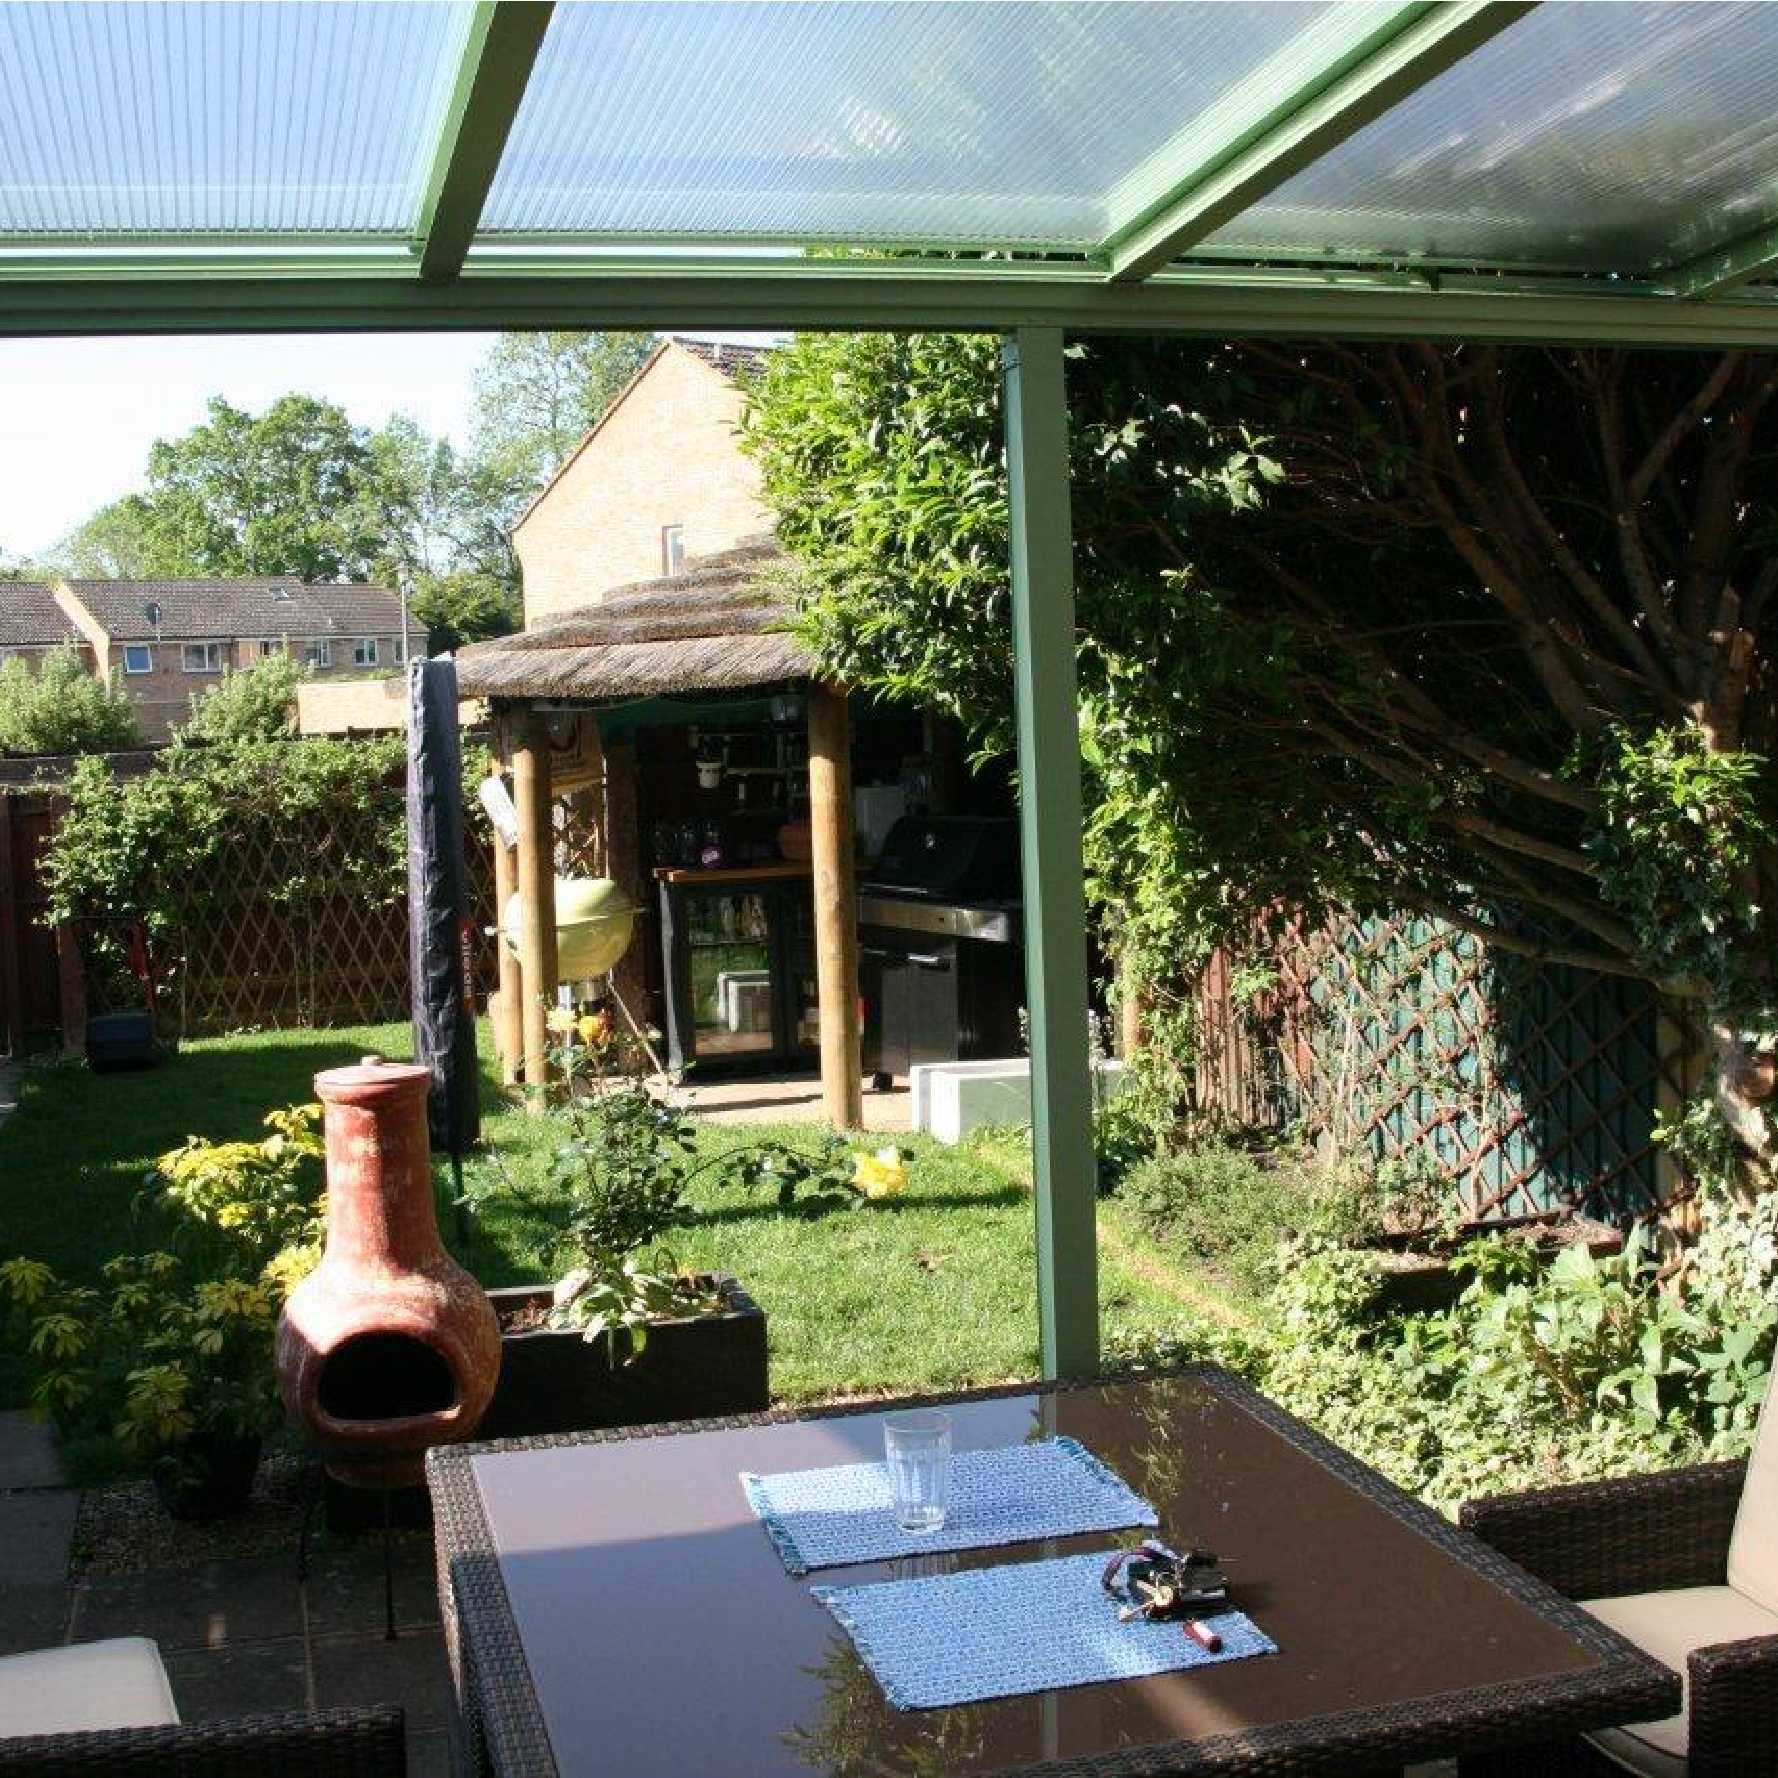 Affordable Omega Smart Lean-To Canopy, White with 16mm Polycarbonate Glazing - 5.2m (W) x 2.0m (P), (3) Supporting Posts